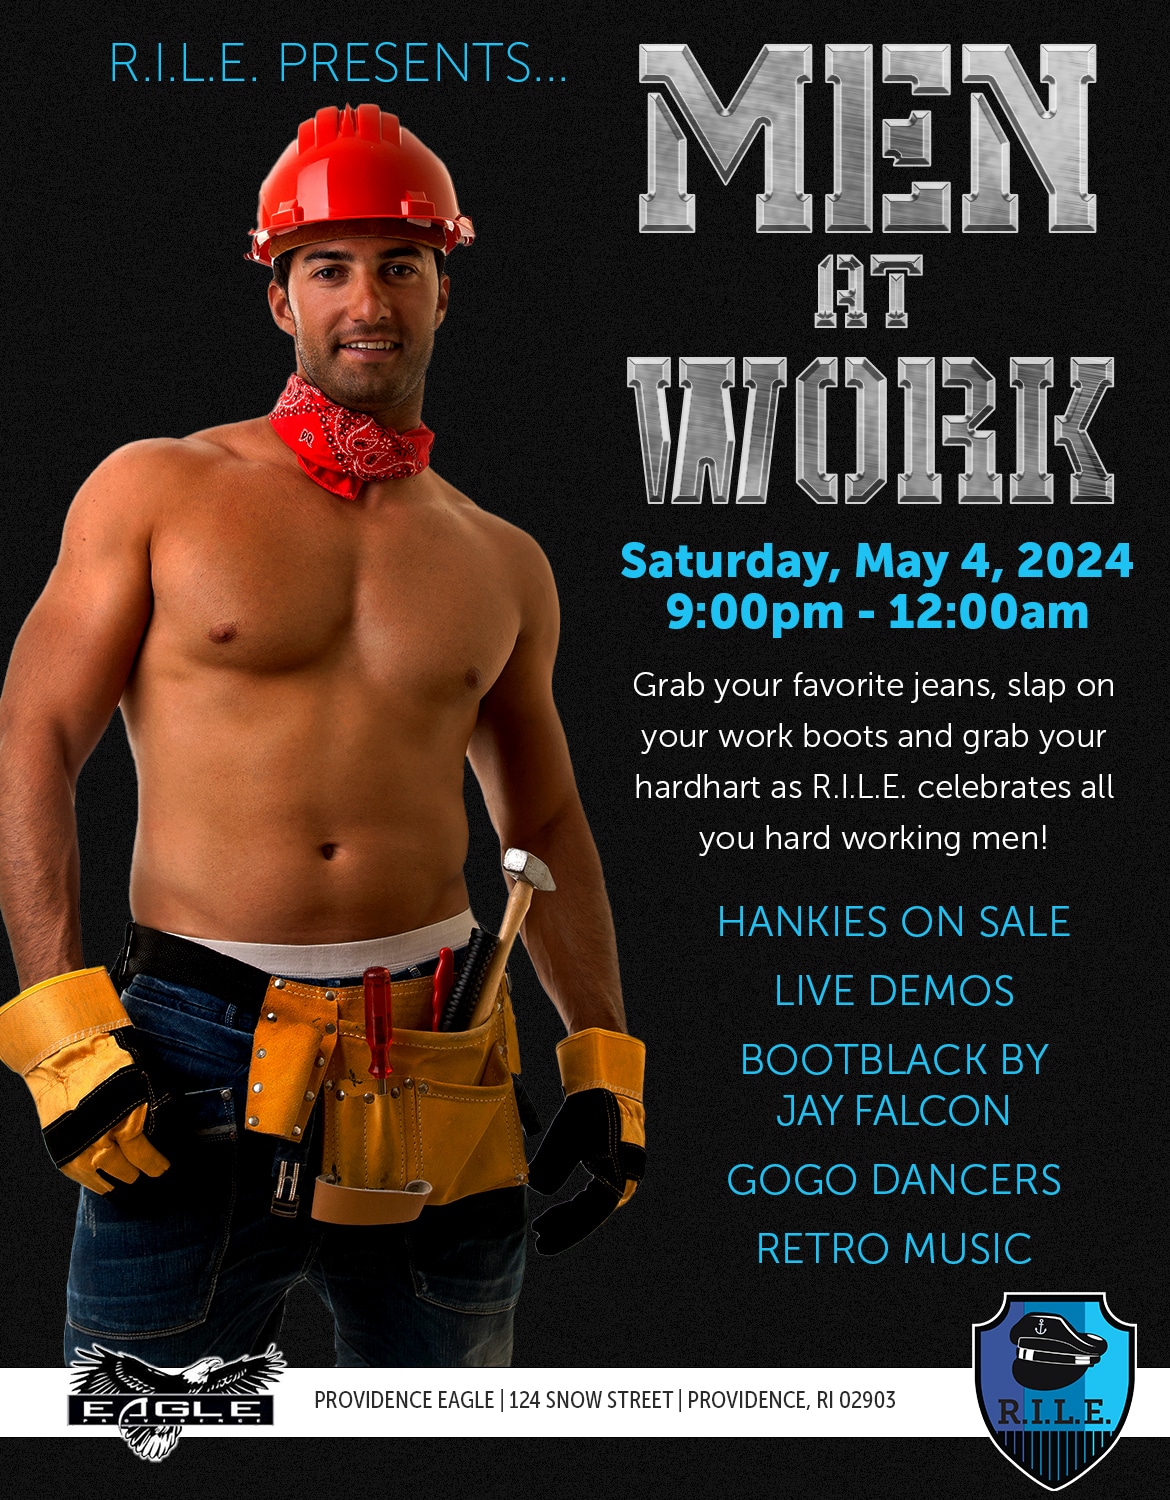 RILE Presents Men at Work with Hankies for sale, boot black by jay falcon, gogo dancers and retro music